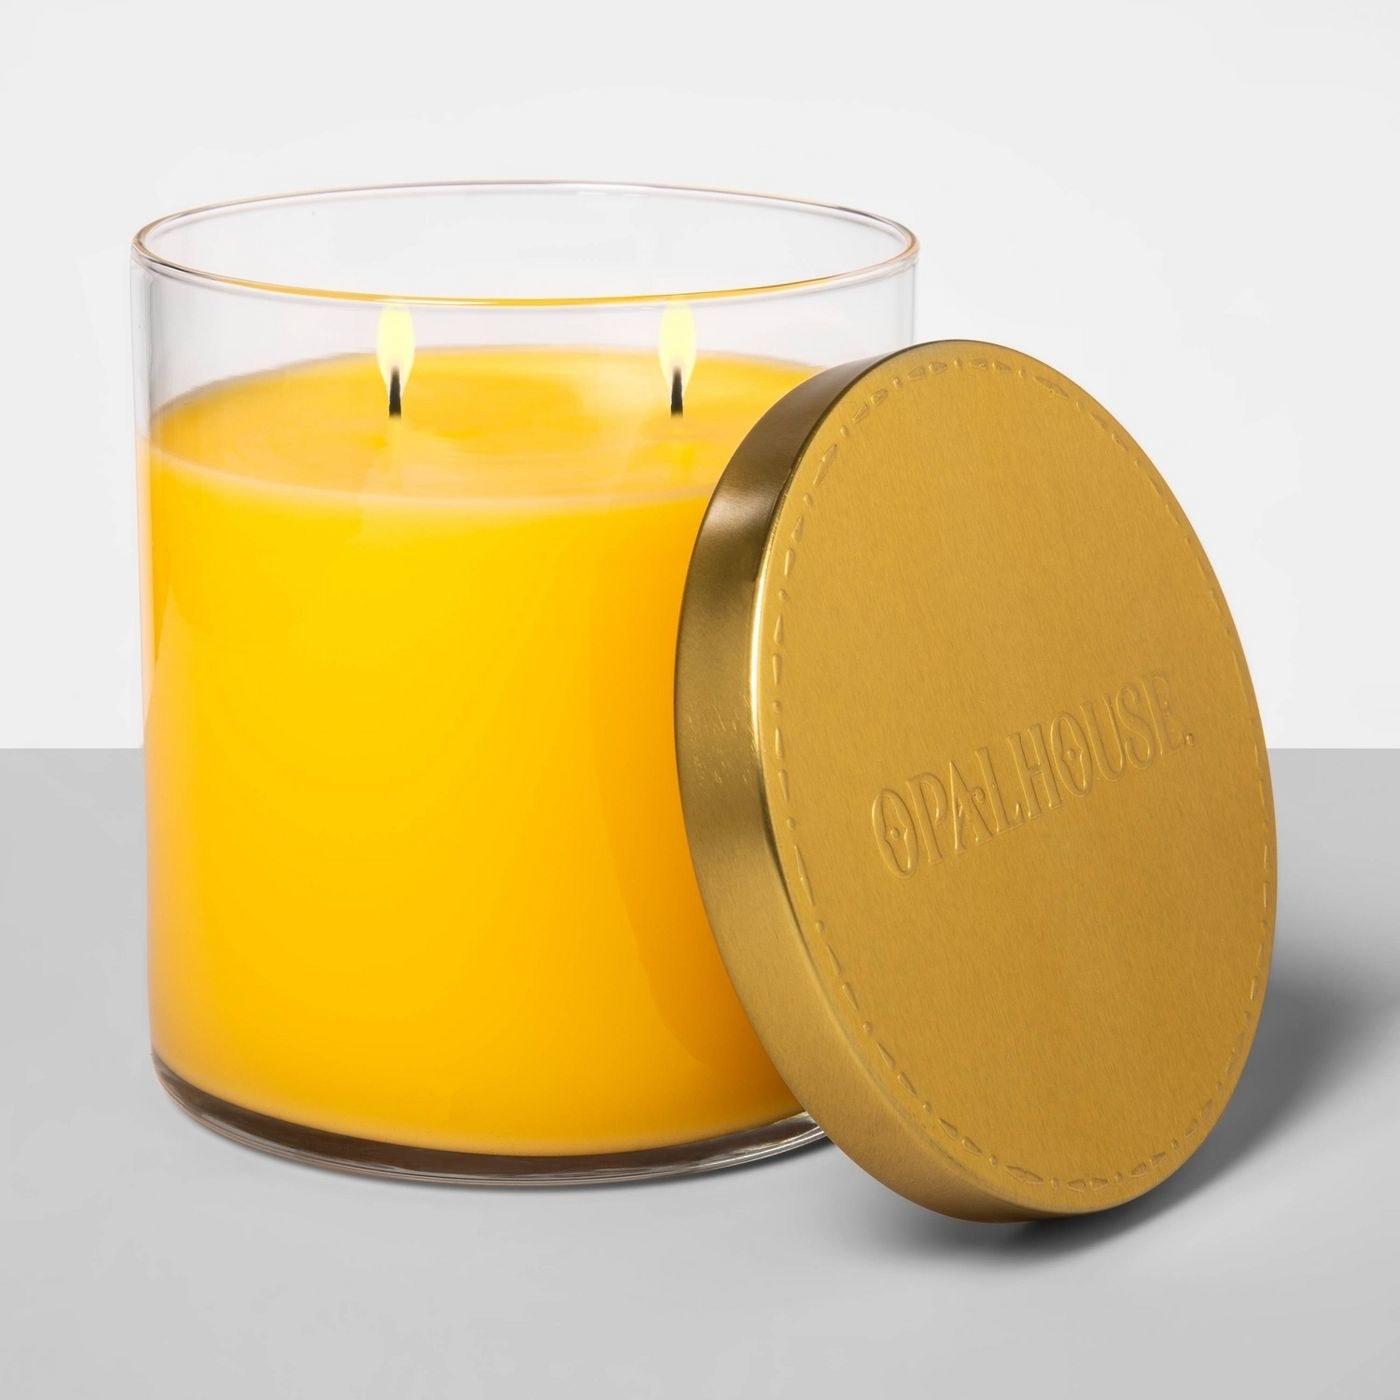 A yellow scented soy candle